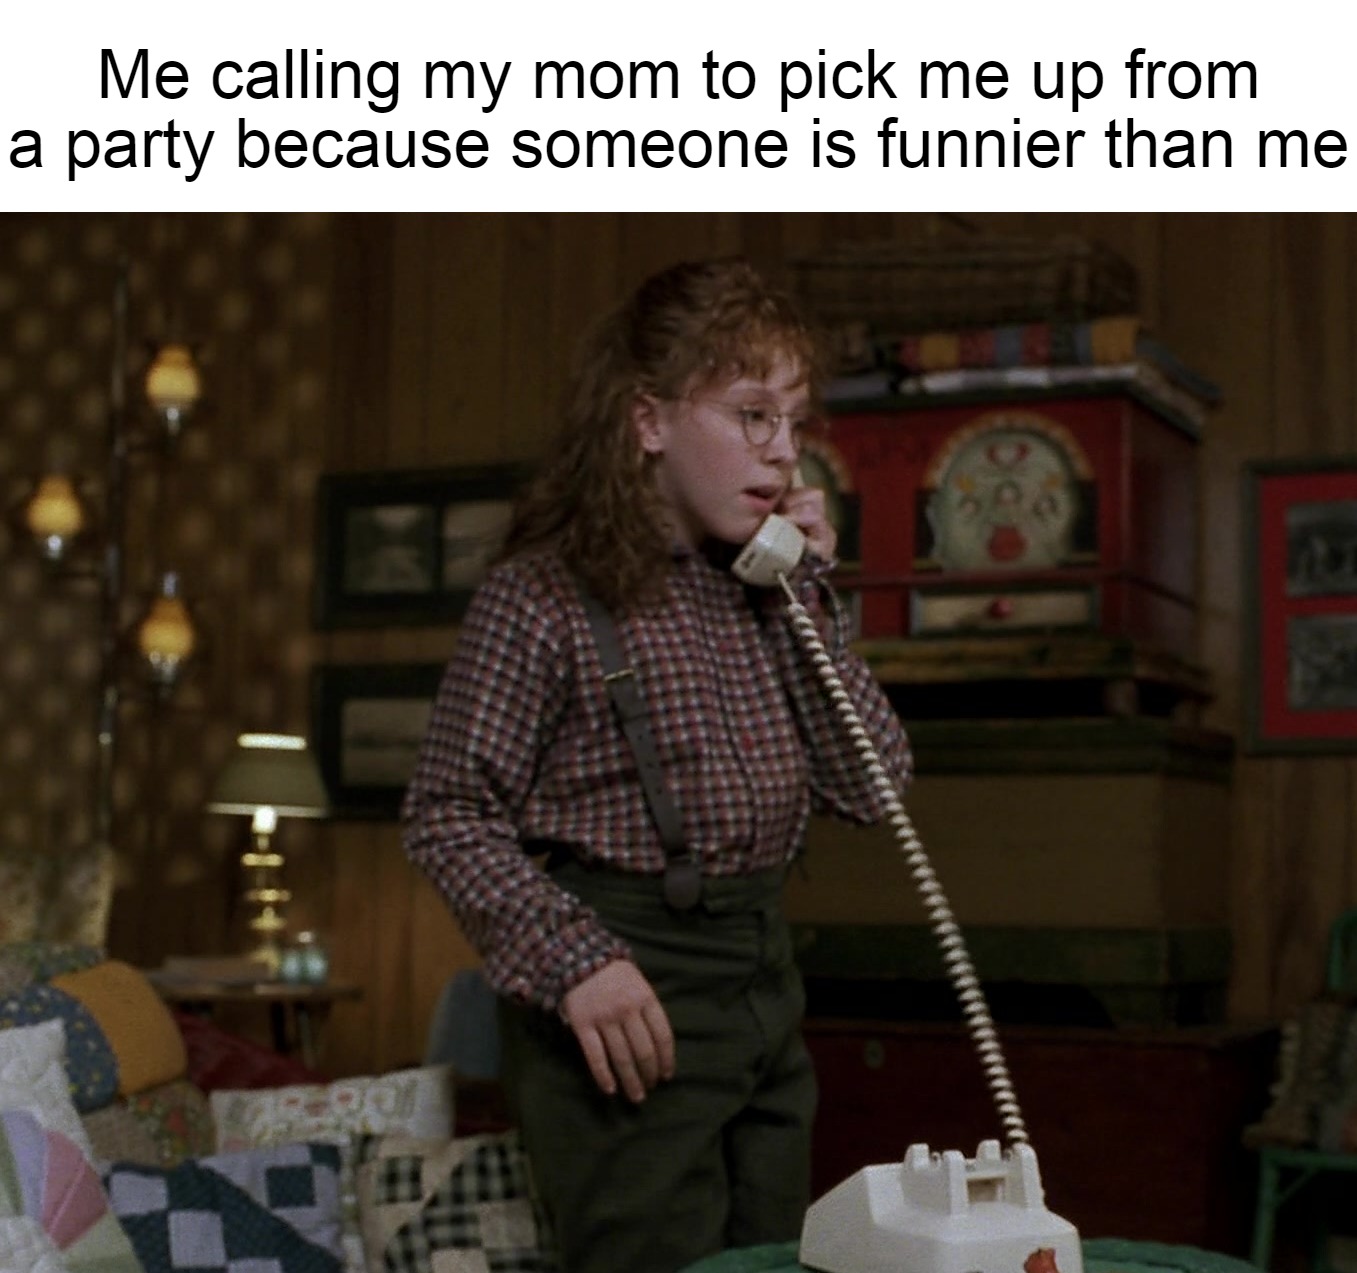 Me calling my mom to pick me up from a party because someone is funnier than me | image tagged in meme,memes,funny,dank memes | made w/ Imgflip meme maker